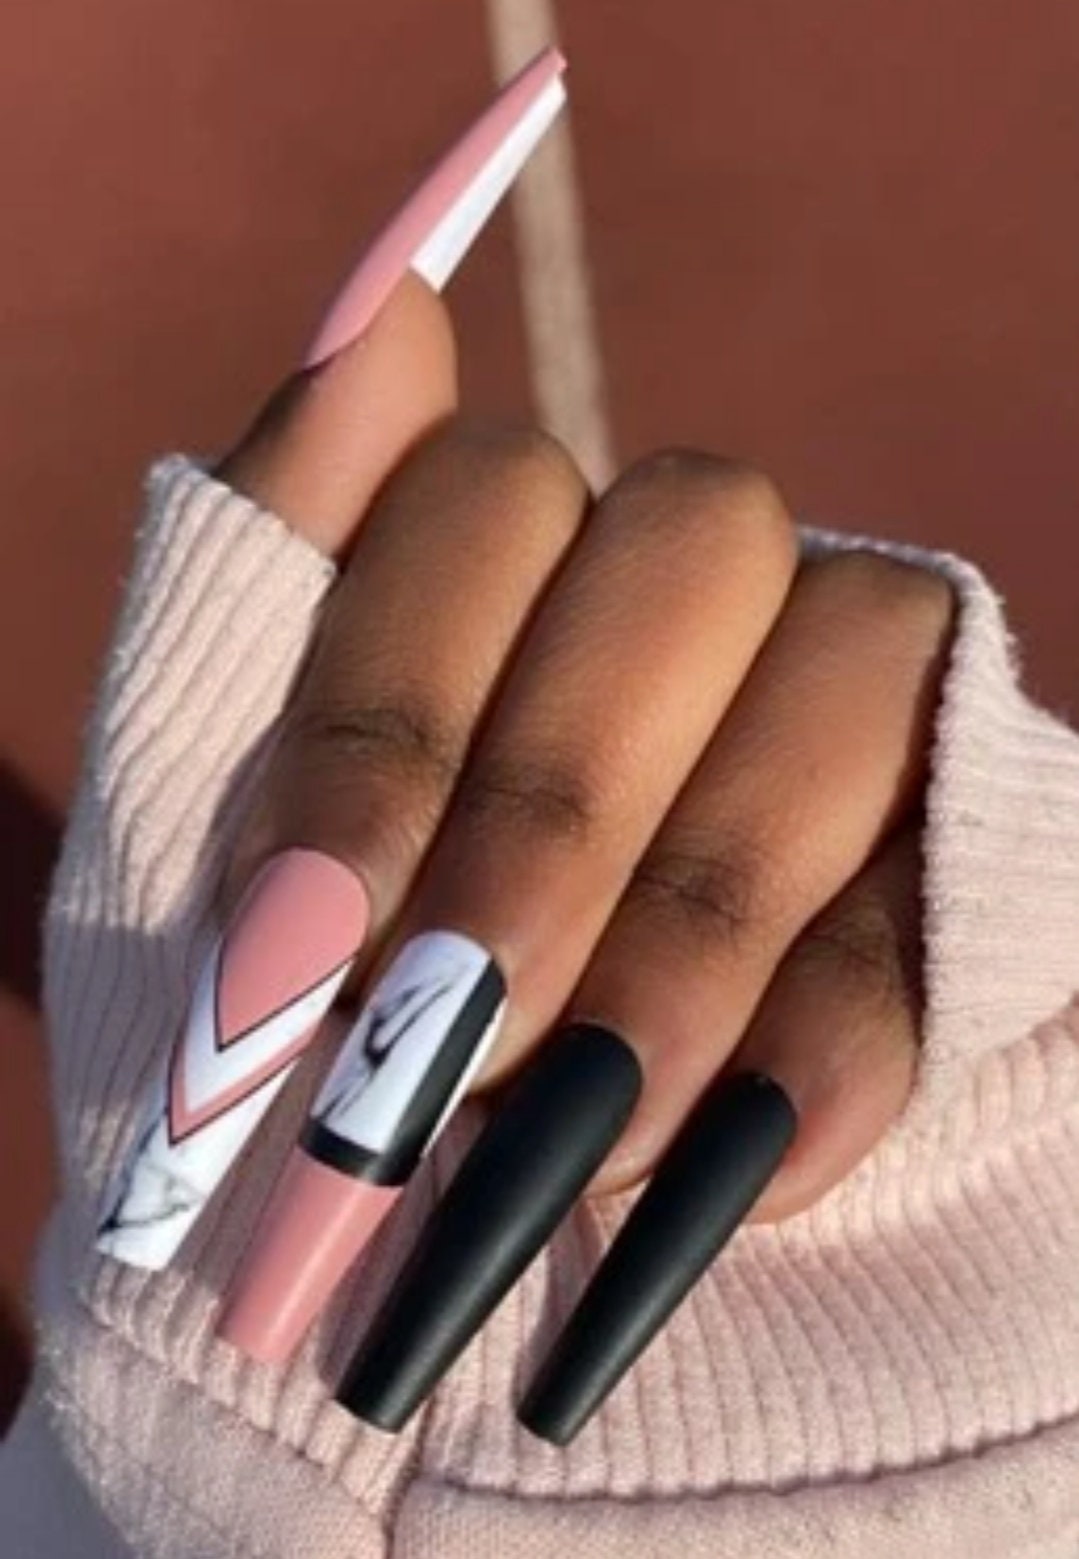 24 Geometric Pink Black White Press on nails glue on Coffin Long extra manicure mauve south western design